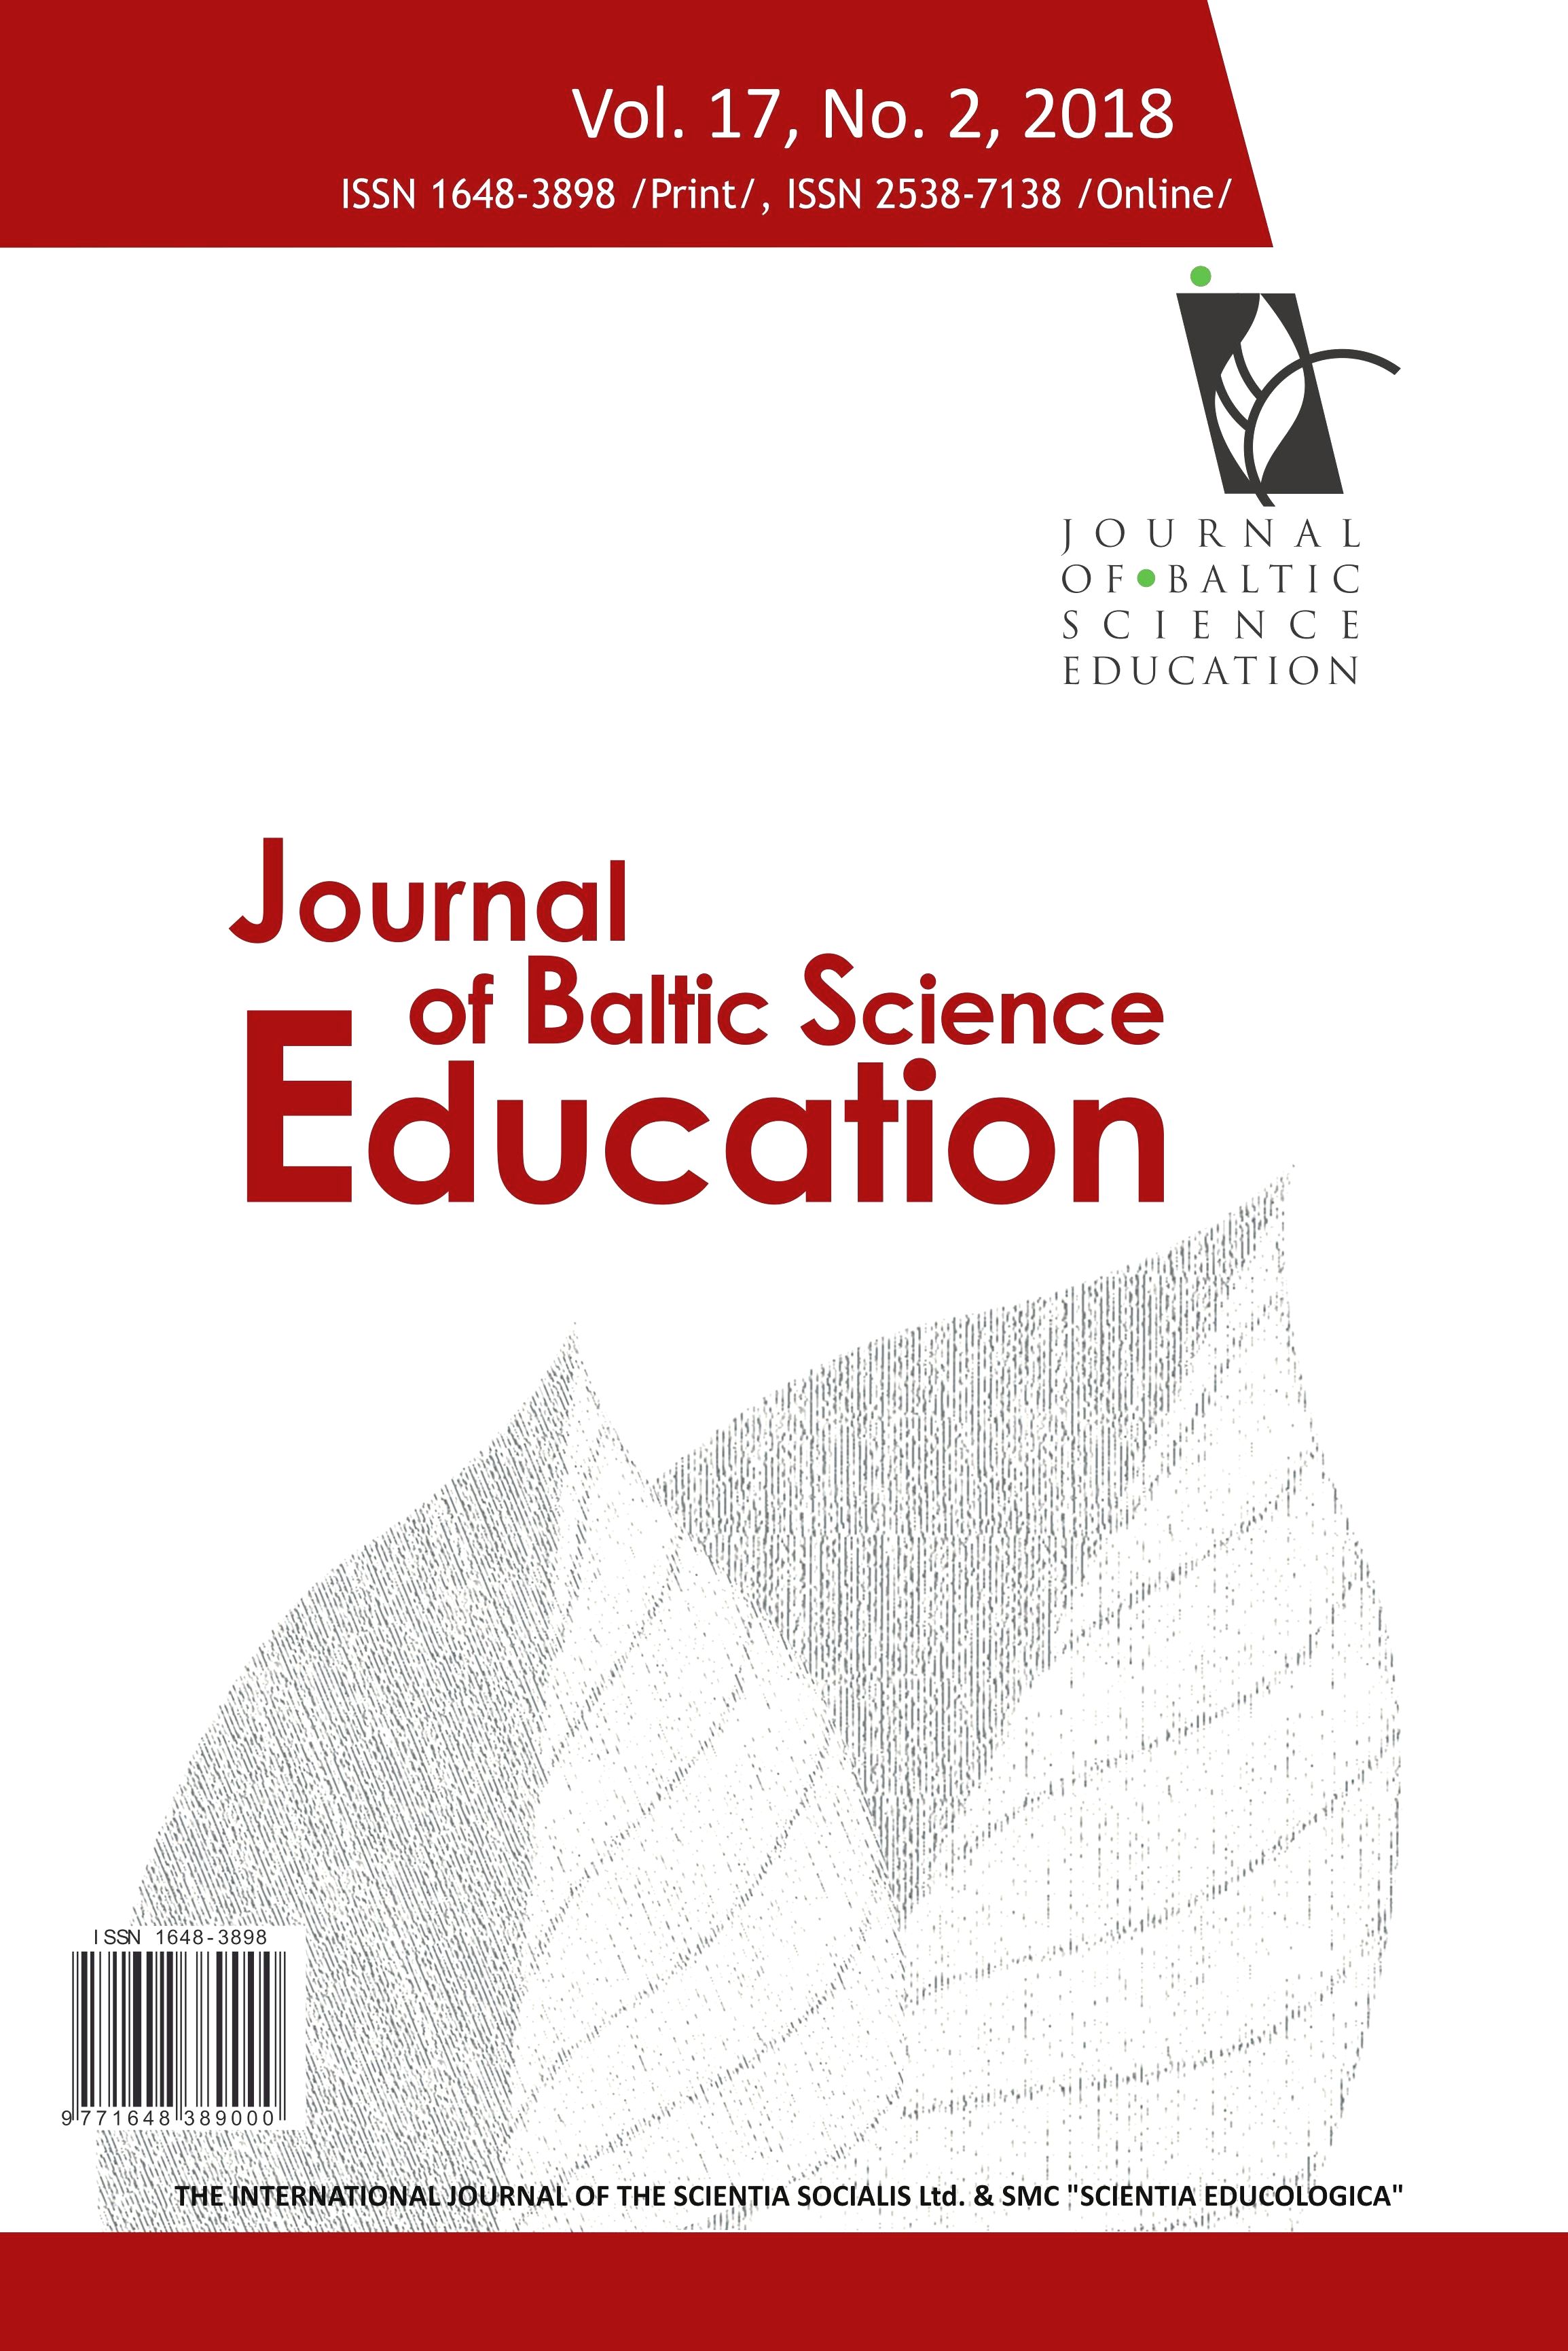 SCIENCE EDUCATION IN SCHOOLS AND AT TERTIARY LEVEL: STATUS QUO OR EMBRACING CHANGE? Cover Image